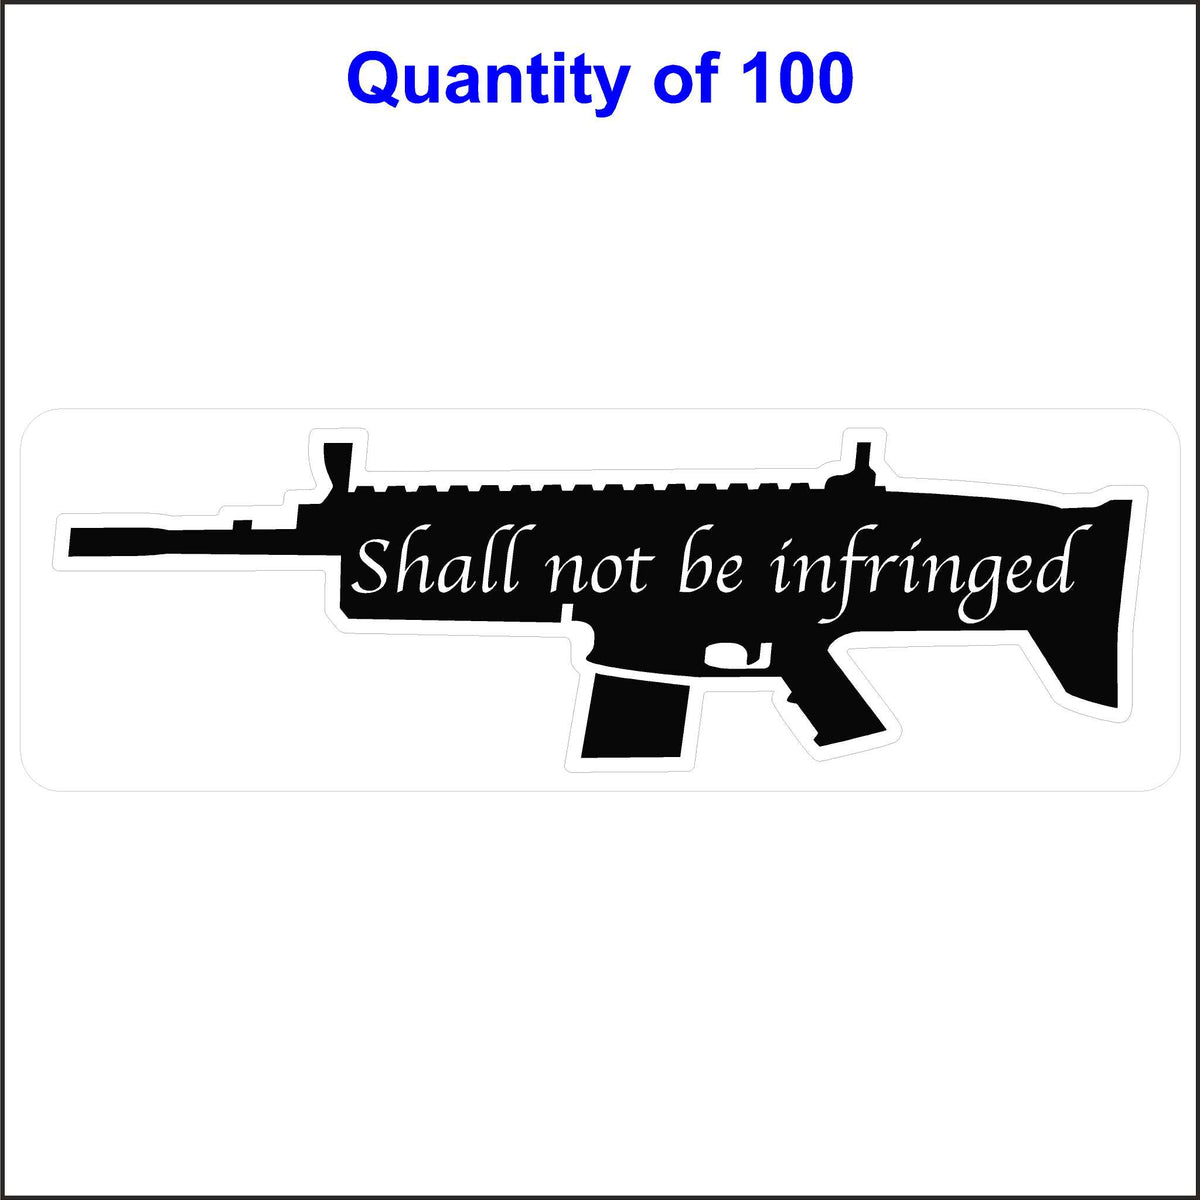 2nd Amendment Sticker With a Gun Silhouette With the Words Shall Not Be Infringed Printed on the Gun. 100 Quantity.